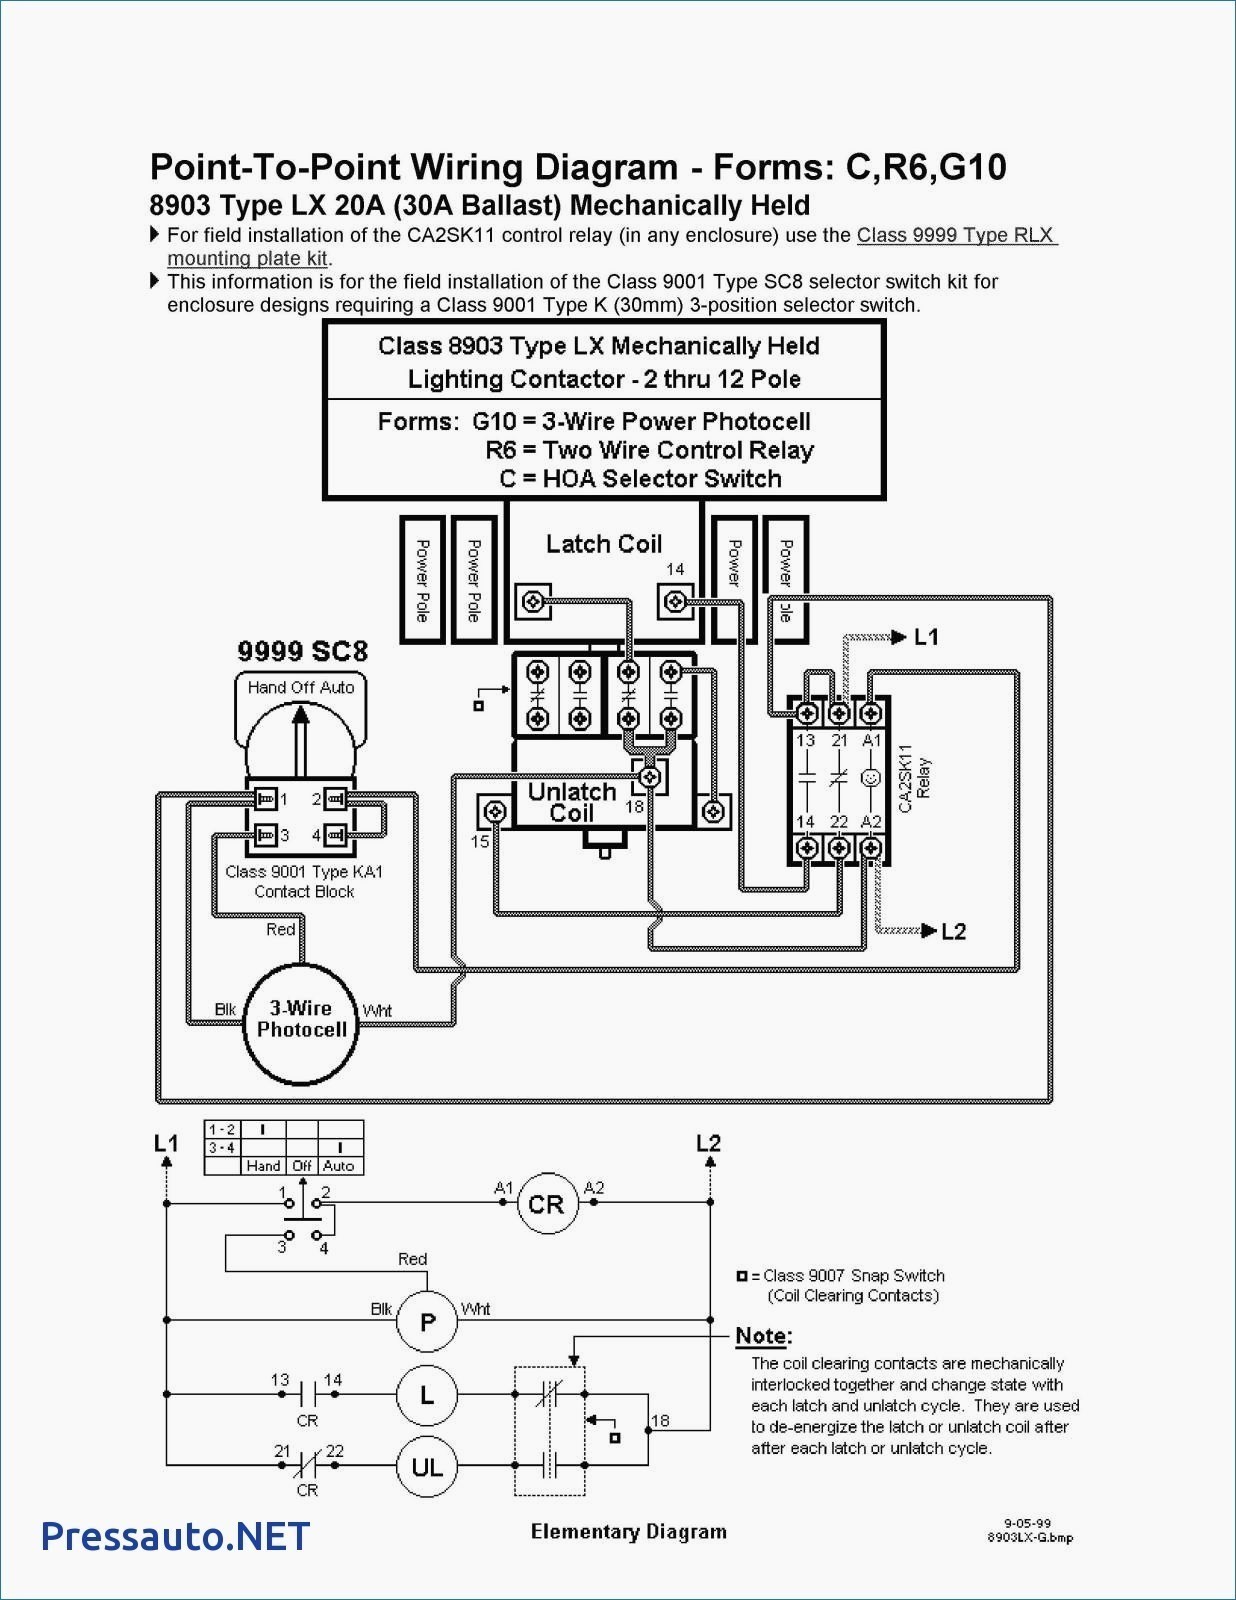 Wiring Diagram for Lighting Contactor Valid Eaton Ecl03c1a9a Lighting Contactor Wiring Diagram Example